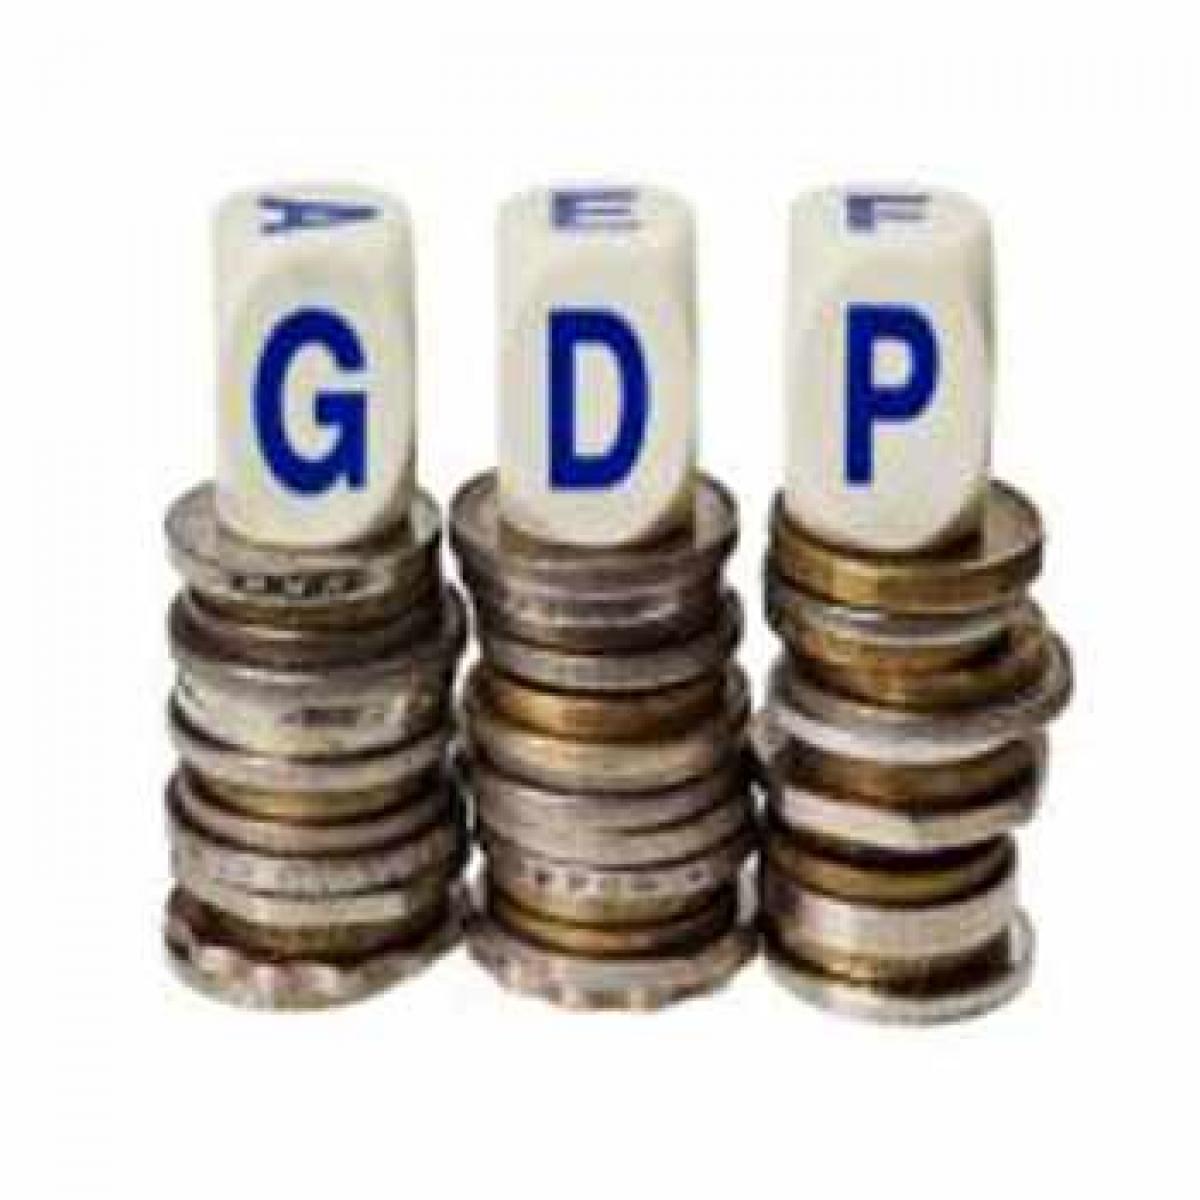 WB sees GDP growth at 7.8% in 2016